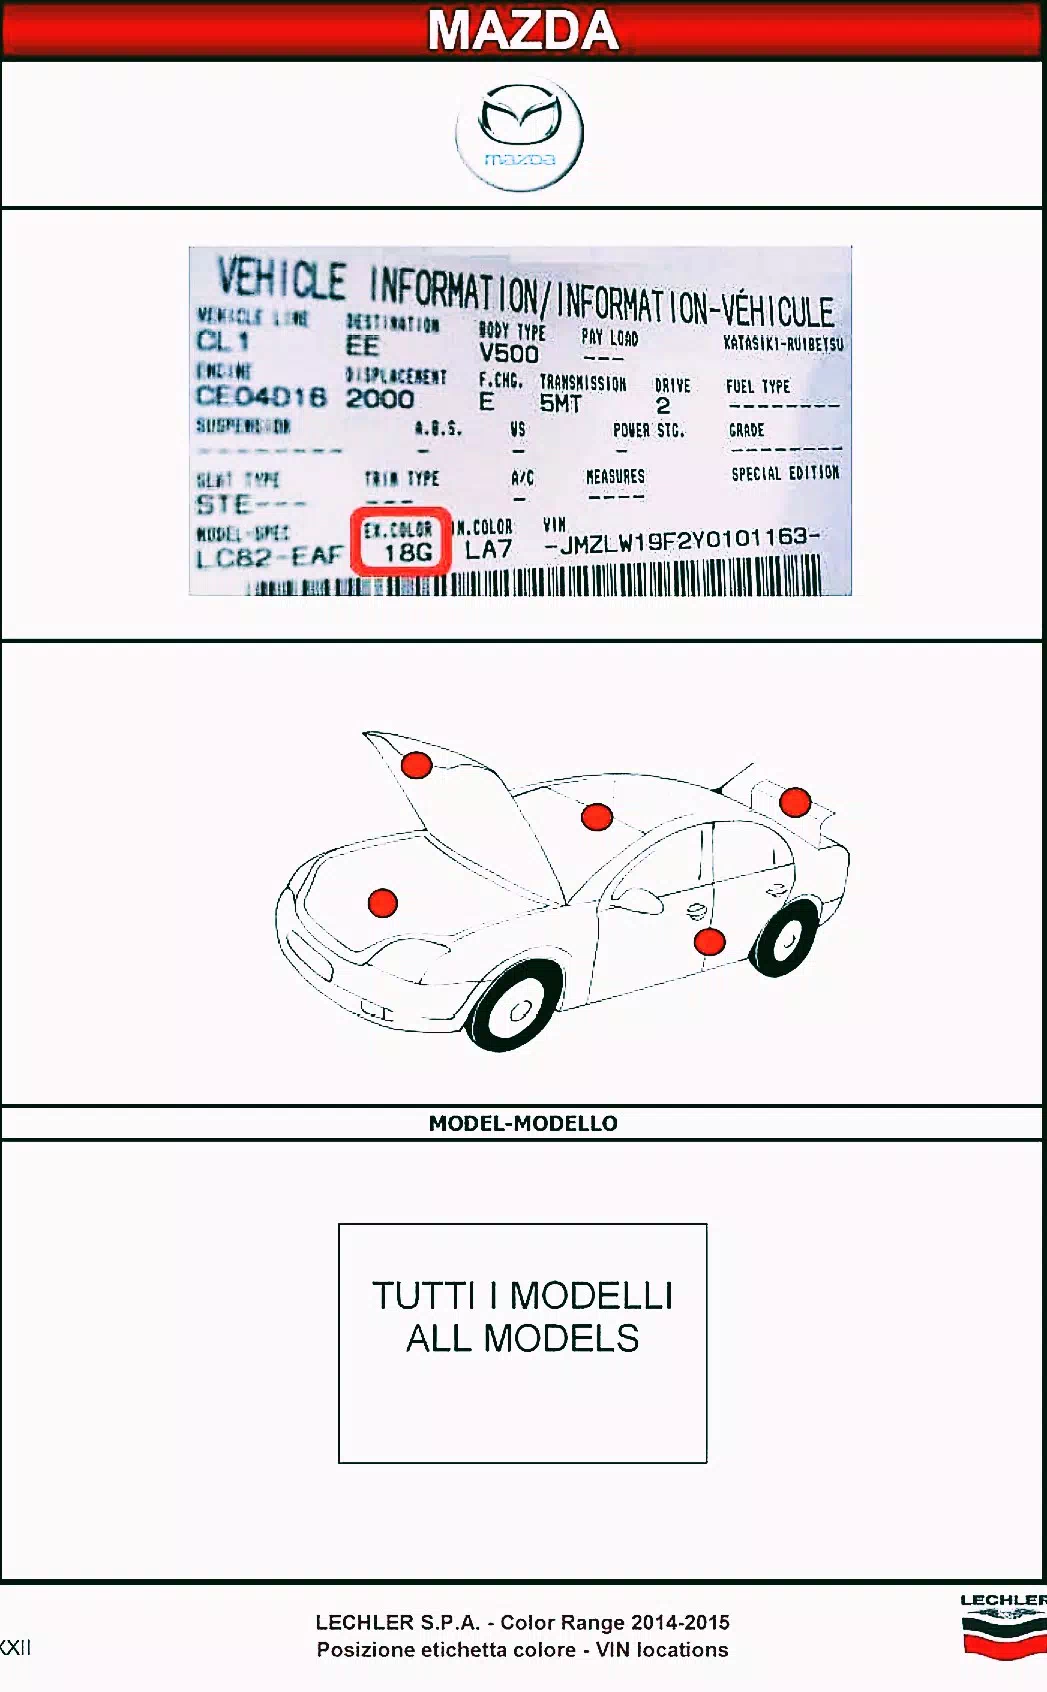 A photo showing the paint code for all 2015 Mazda Vehicles are all over the vehicle as indicated by the red dots